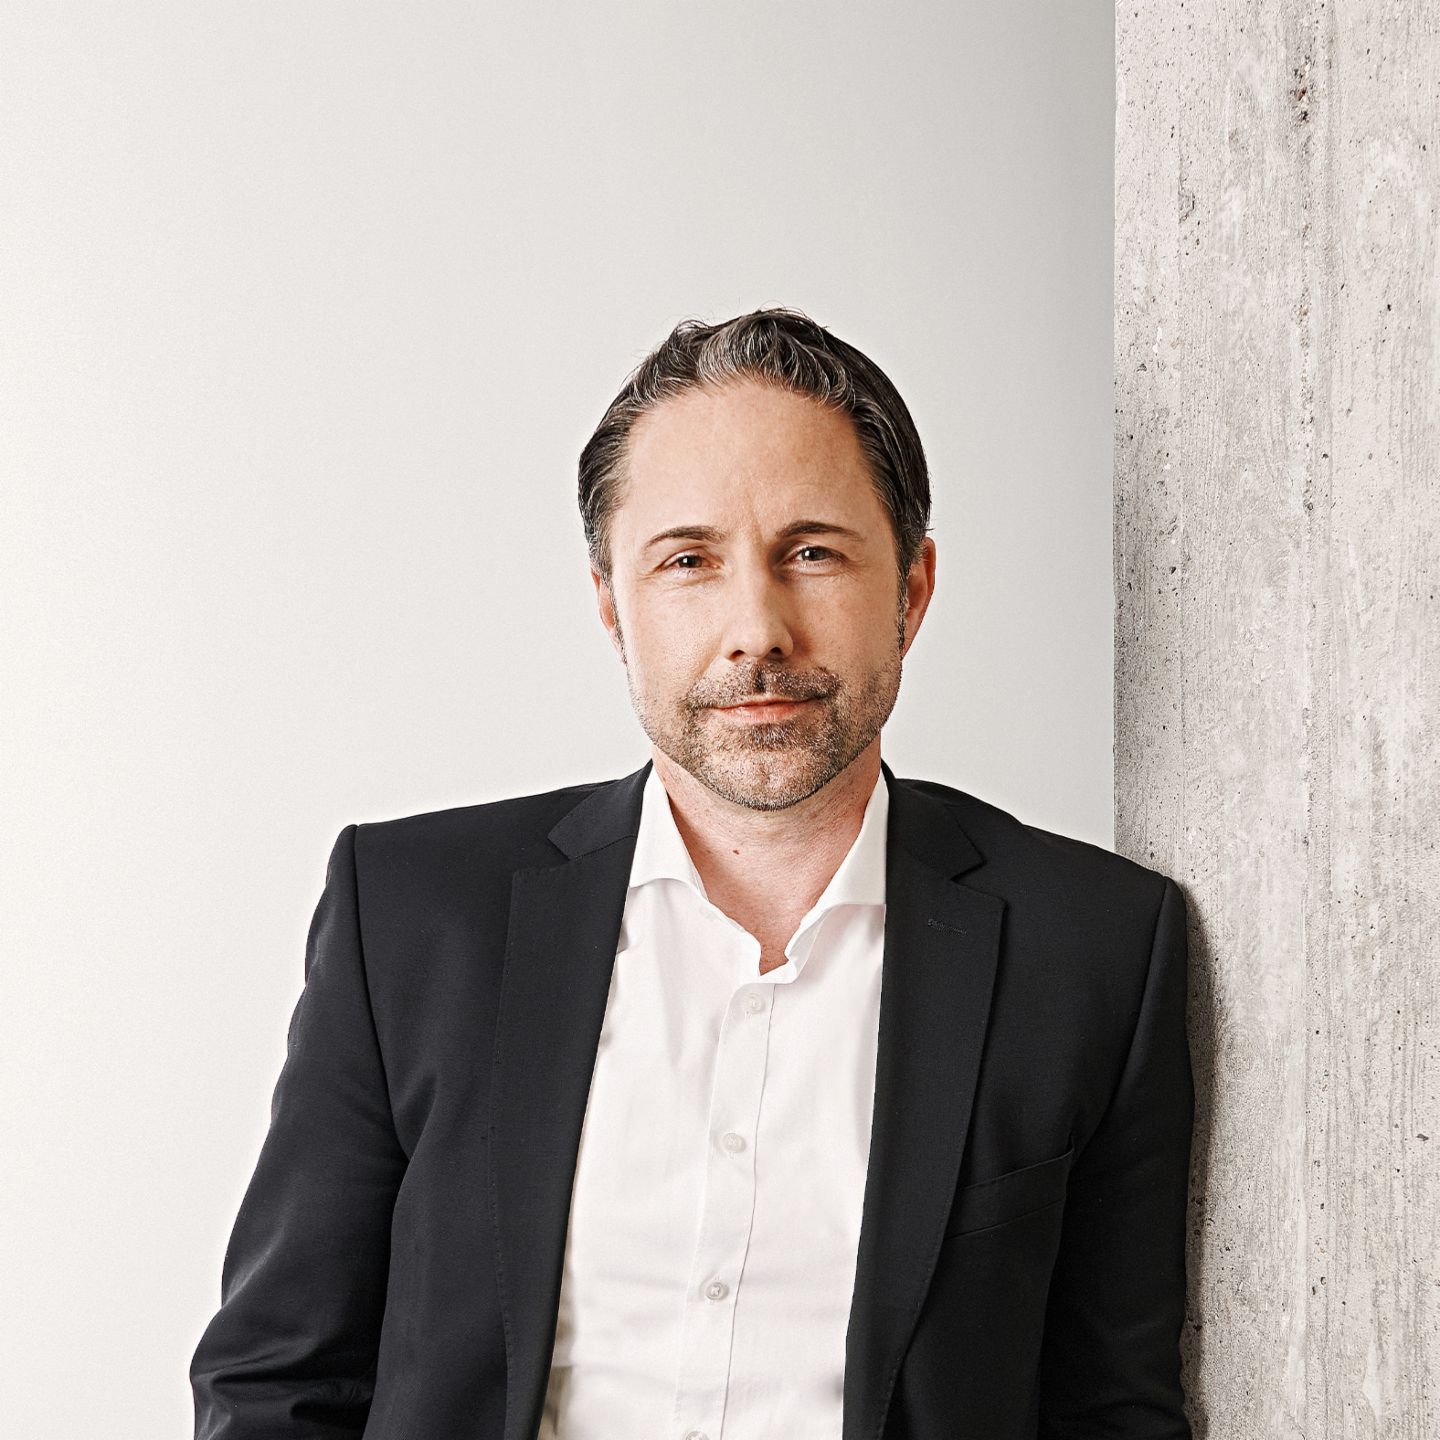 Marwin Ramcke, CEO of the EOS Group